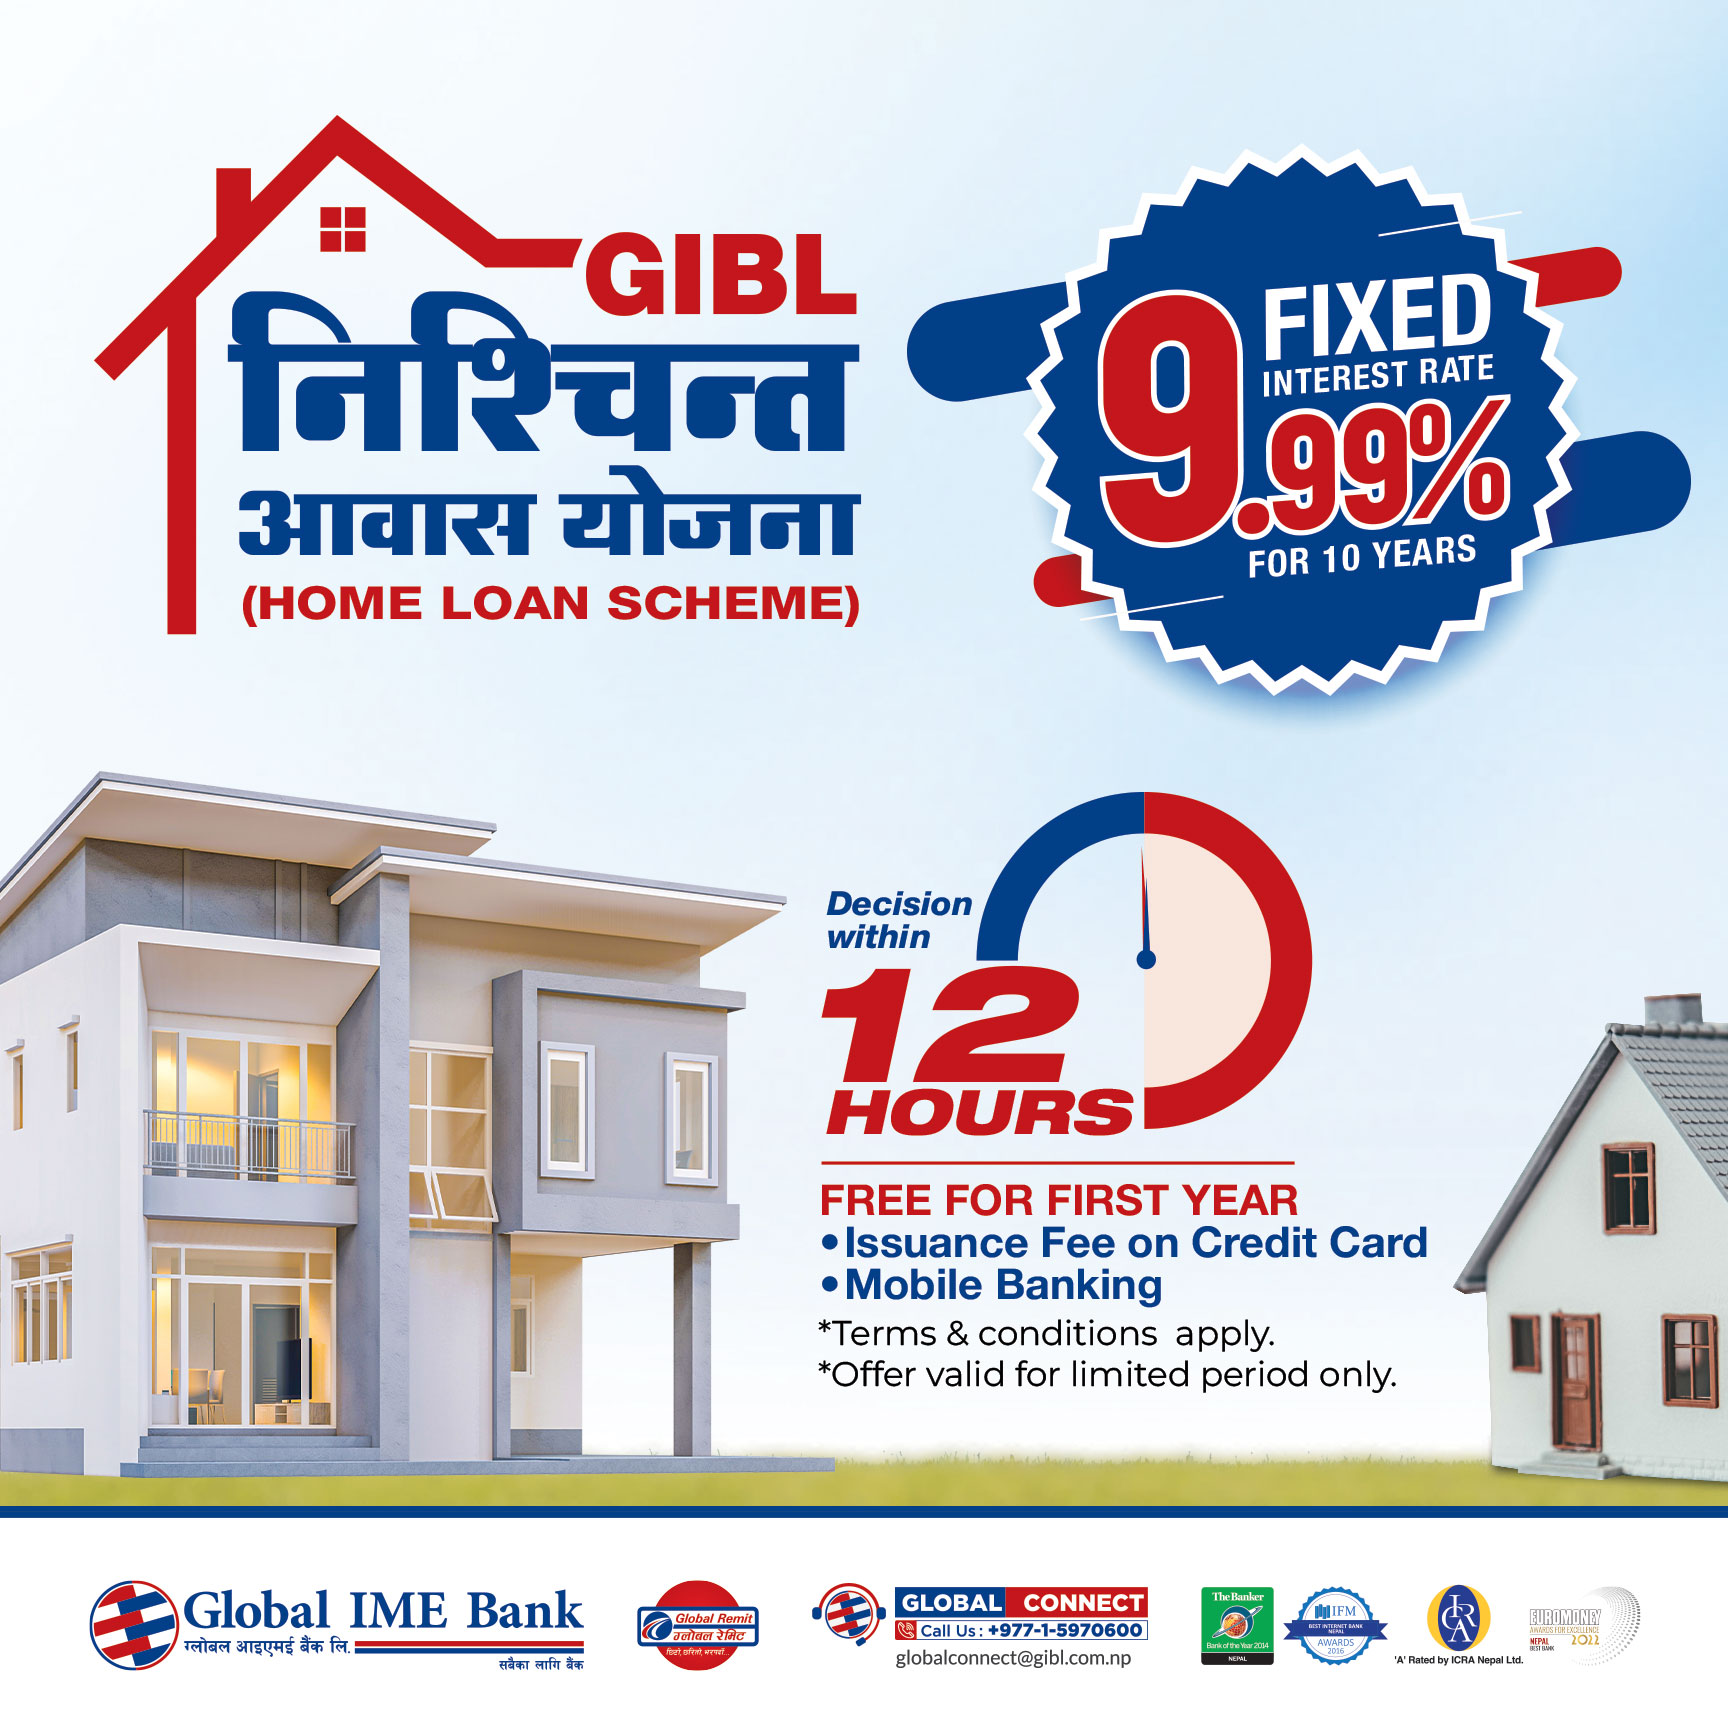 Global IME Bank introduces special housing loan scheme with 9.99% fixed interest rate